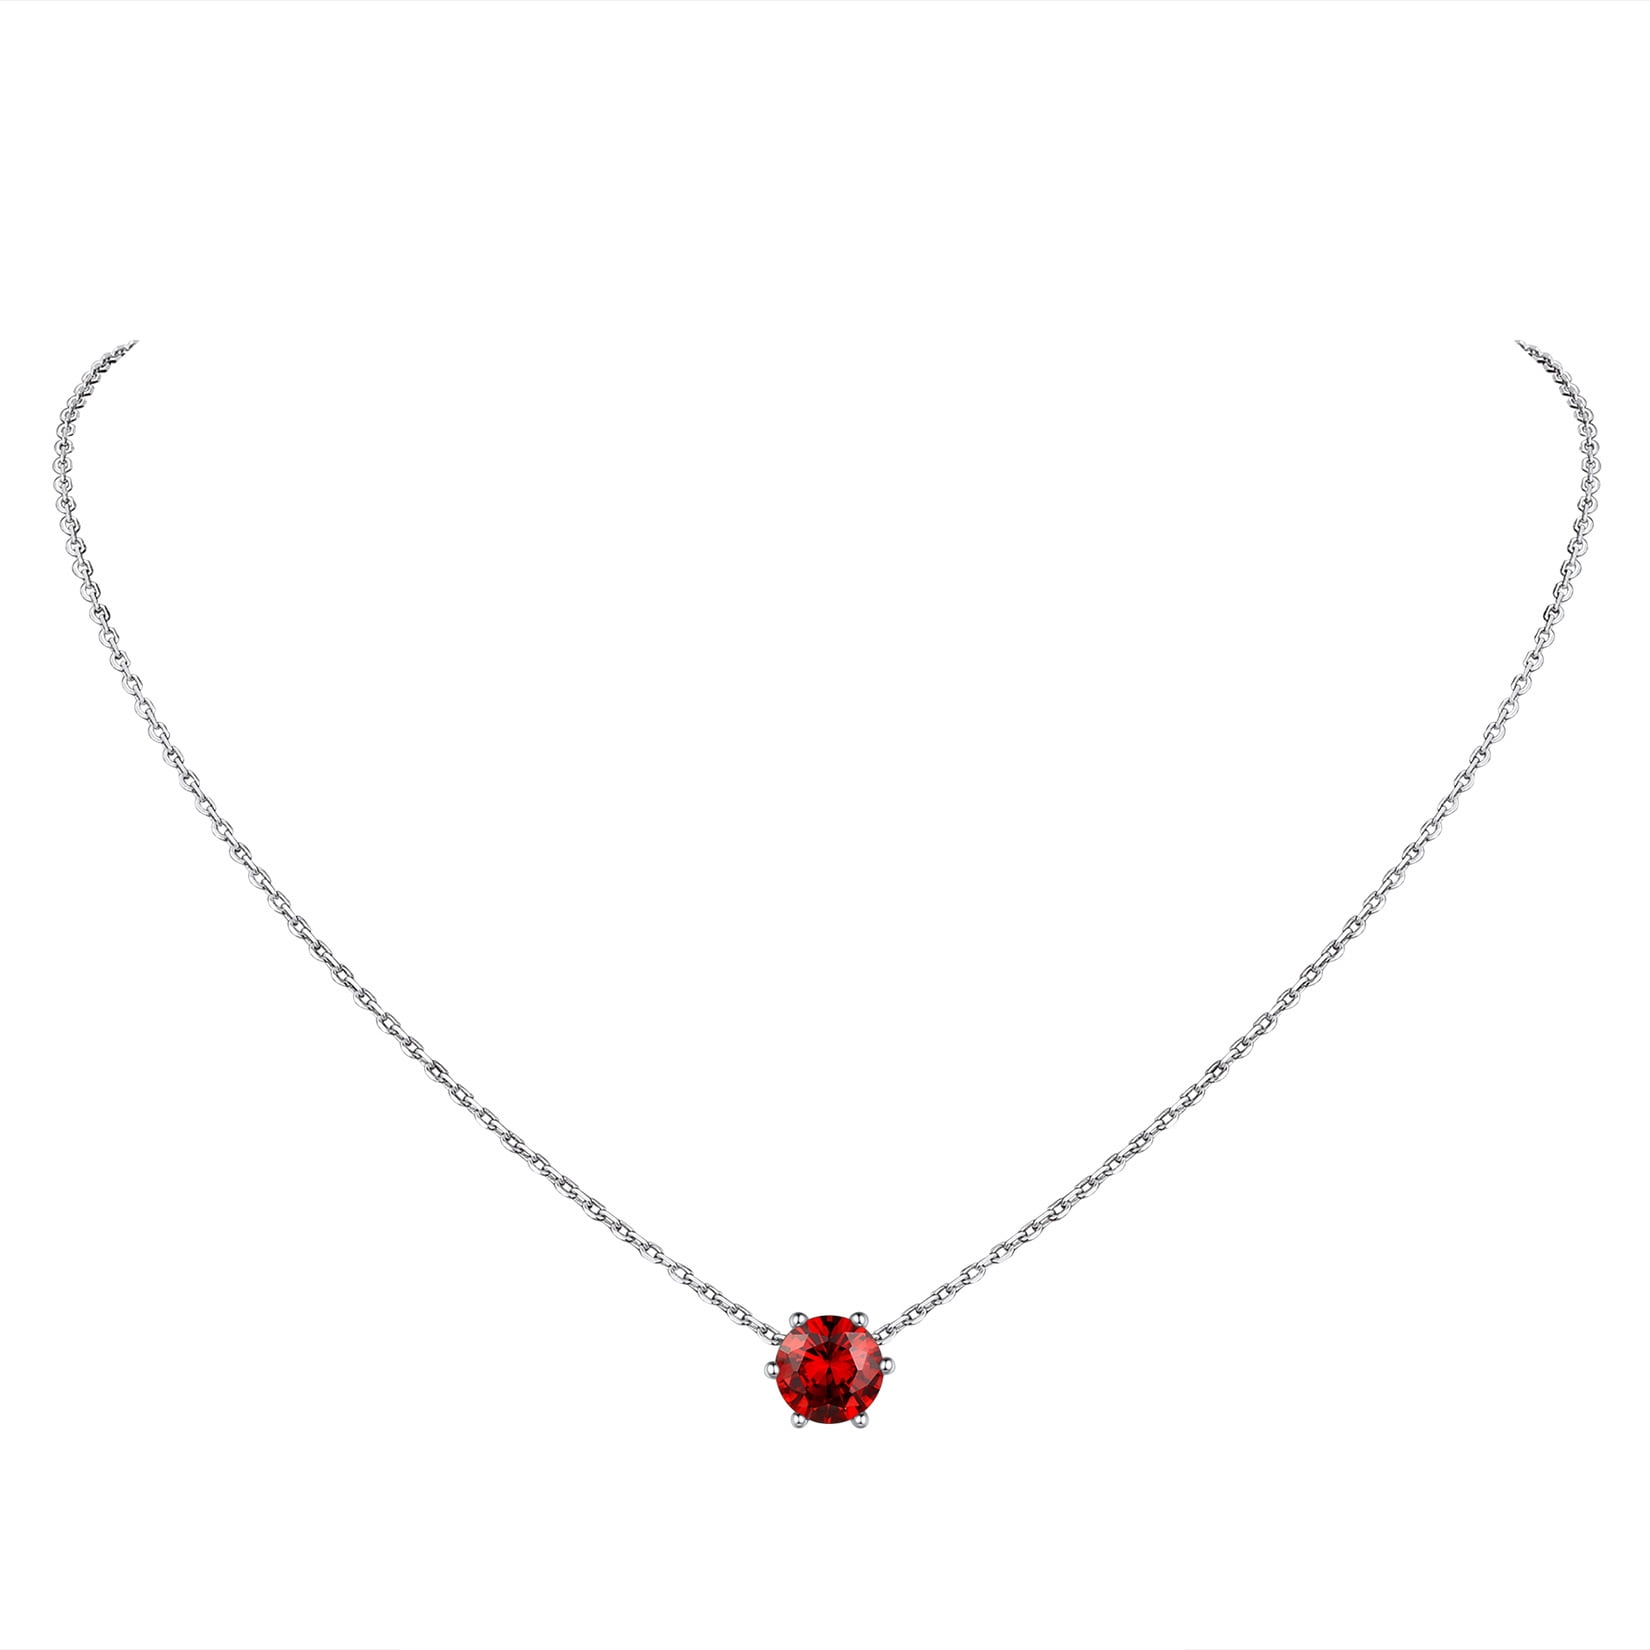 Suplight 925 Sterling Silver 6 Prong Birthstone Necklace, Dainty Small ...